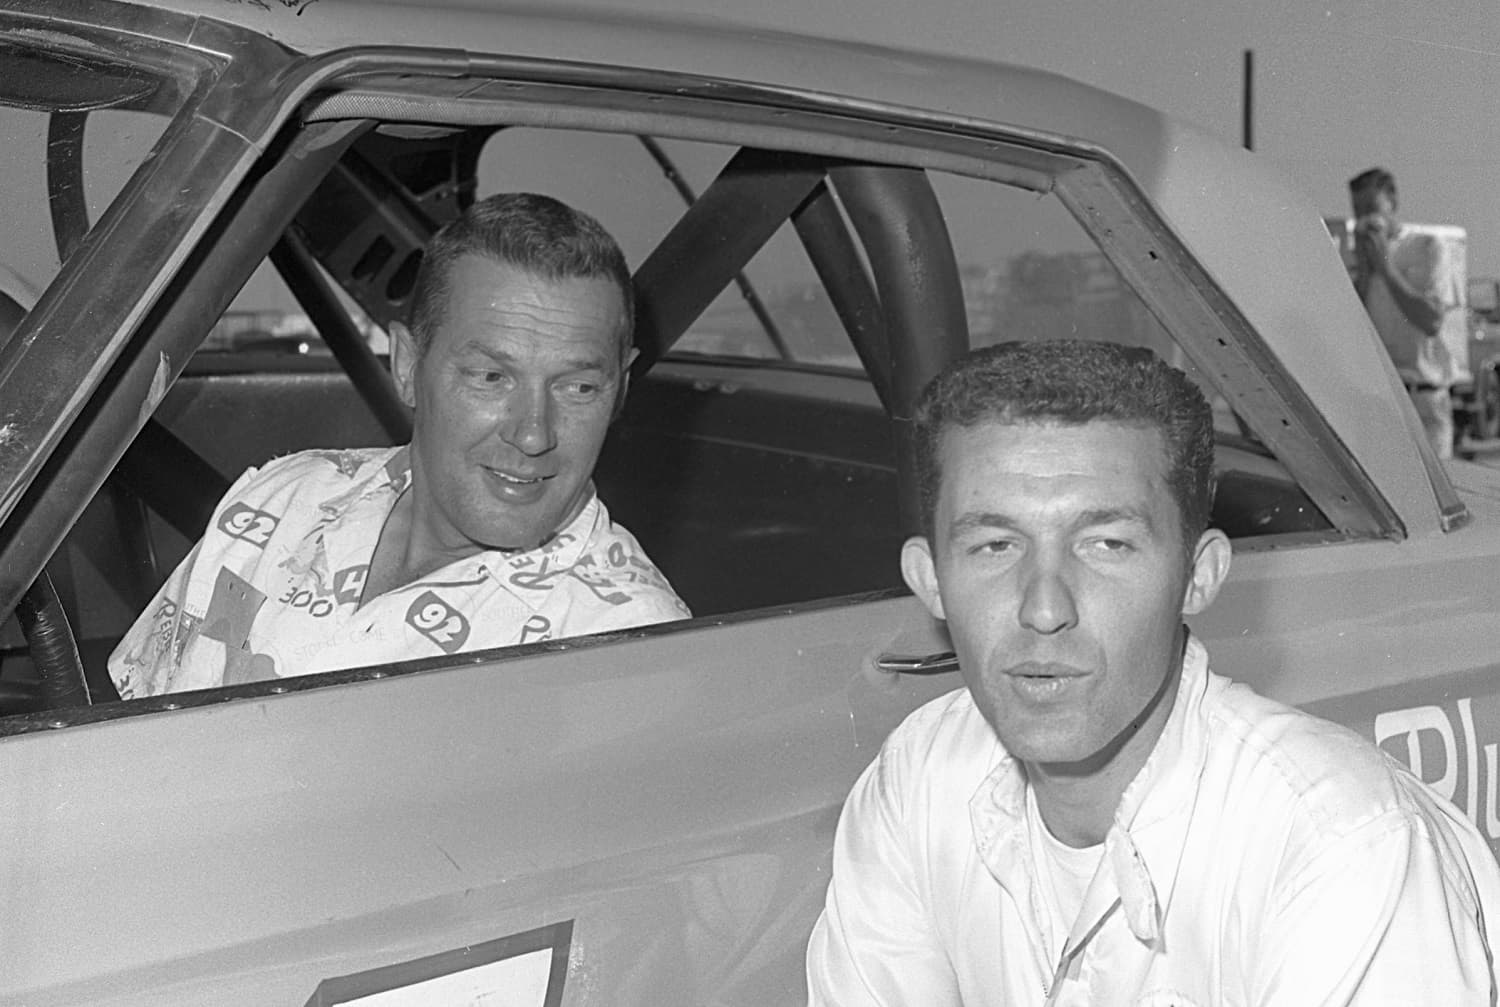 Jim Paschal (in car) and Richard Petty pose for a photo during the 1965 NASCAR season. Petty Enterprises hired Paschal to drive in three races, and he responded by finishing no worse than fifth.